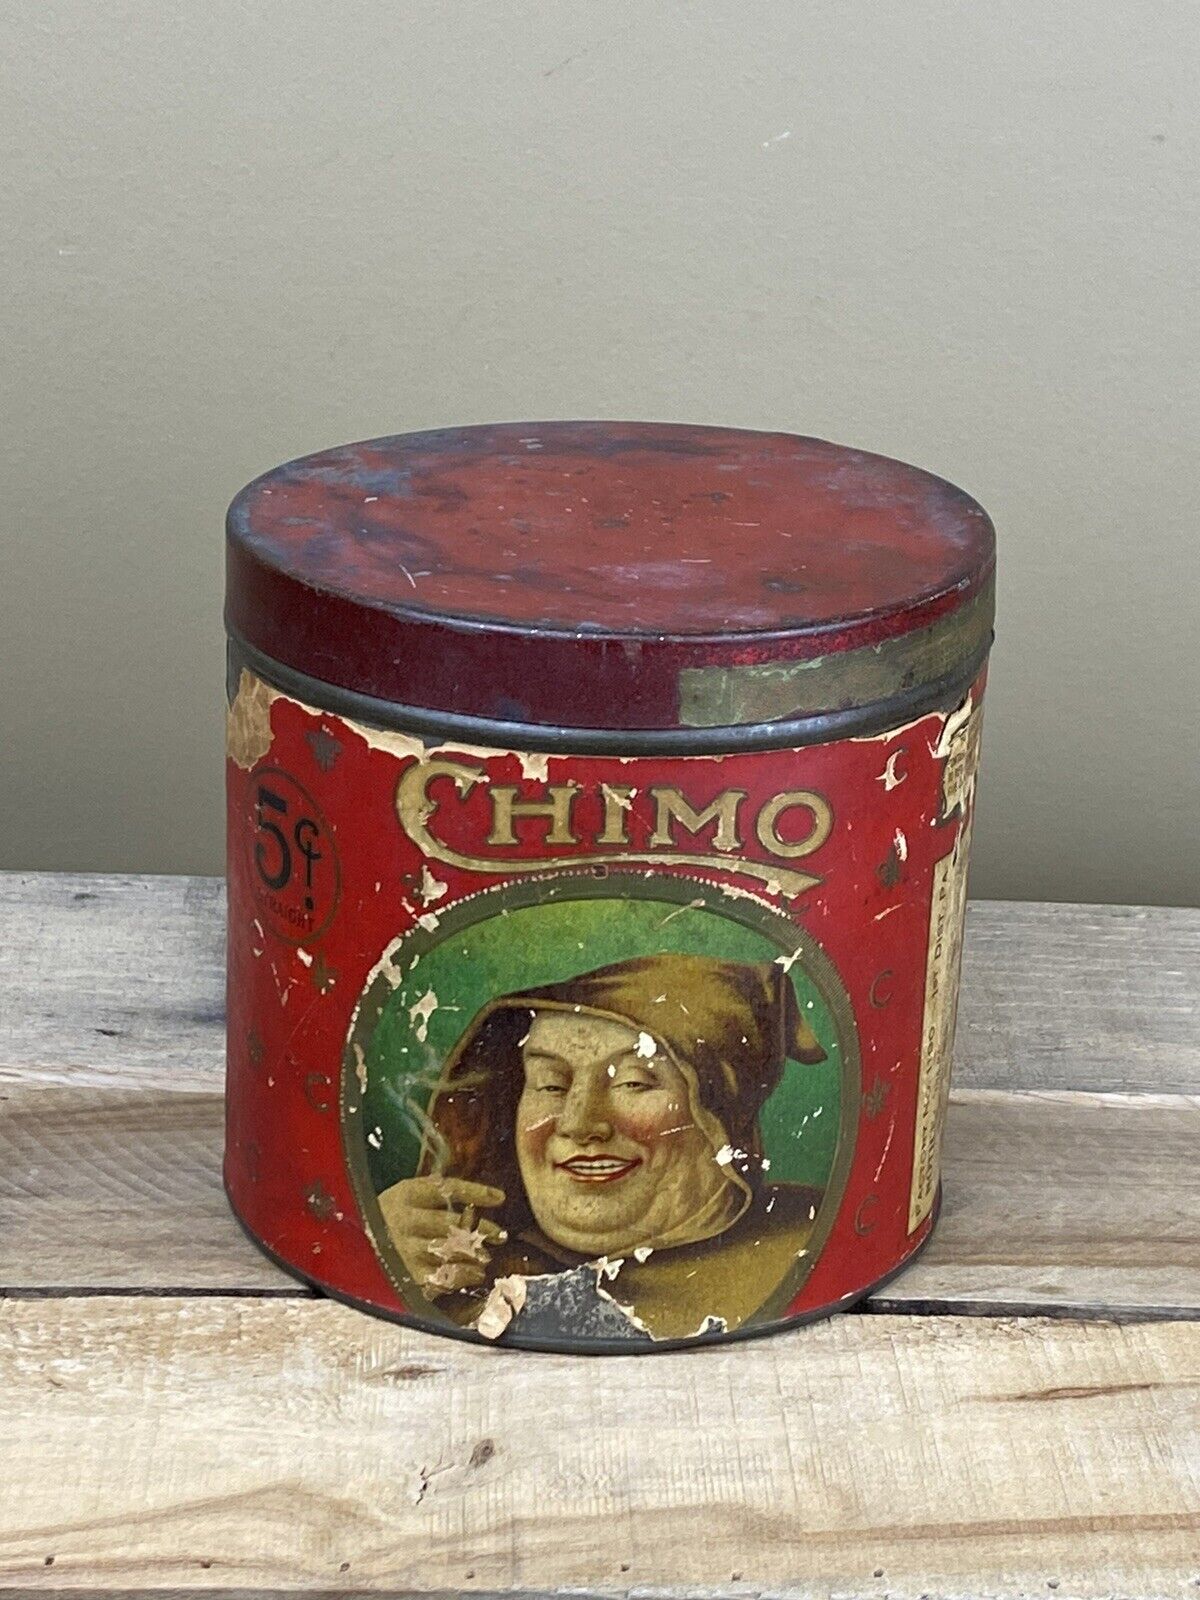 Rare Antique 1890s Paper Label CHIMO 50 Cigar Humidor Tin with Lid - 5 Cents